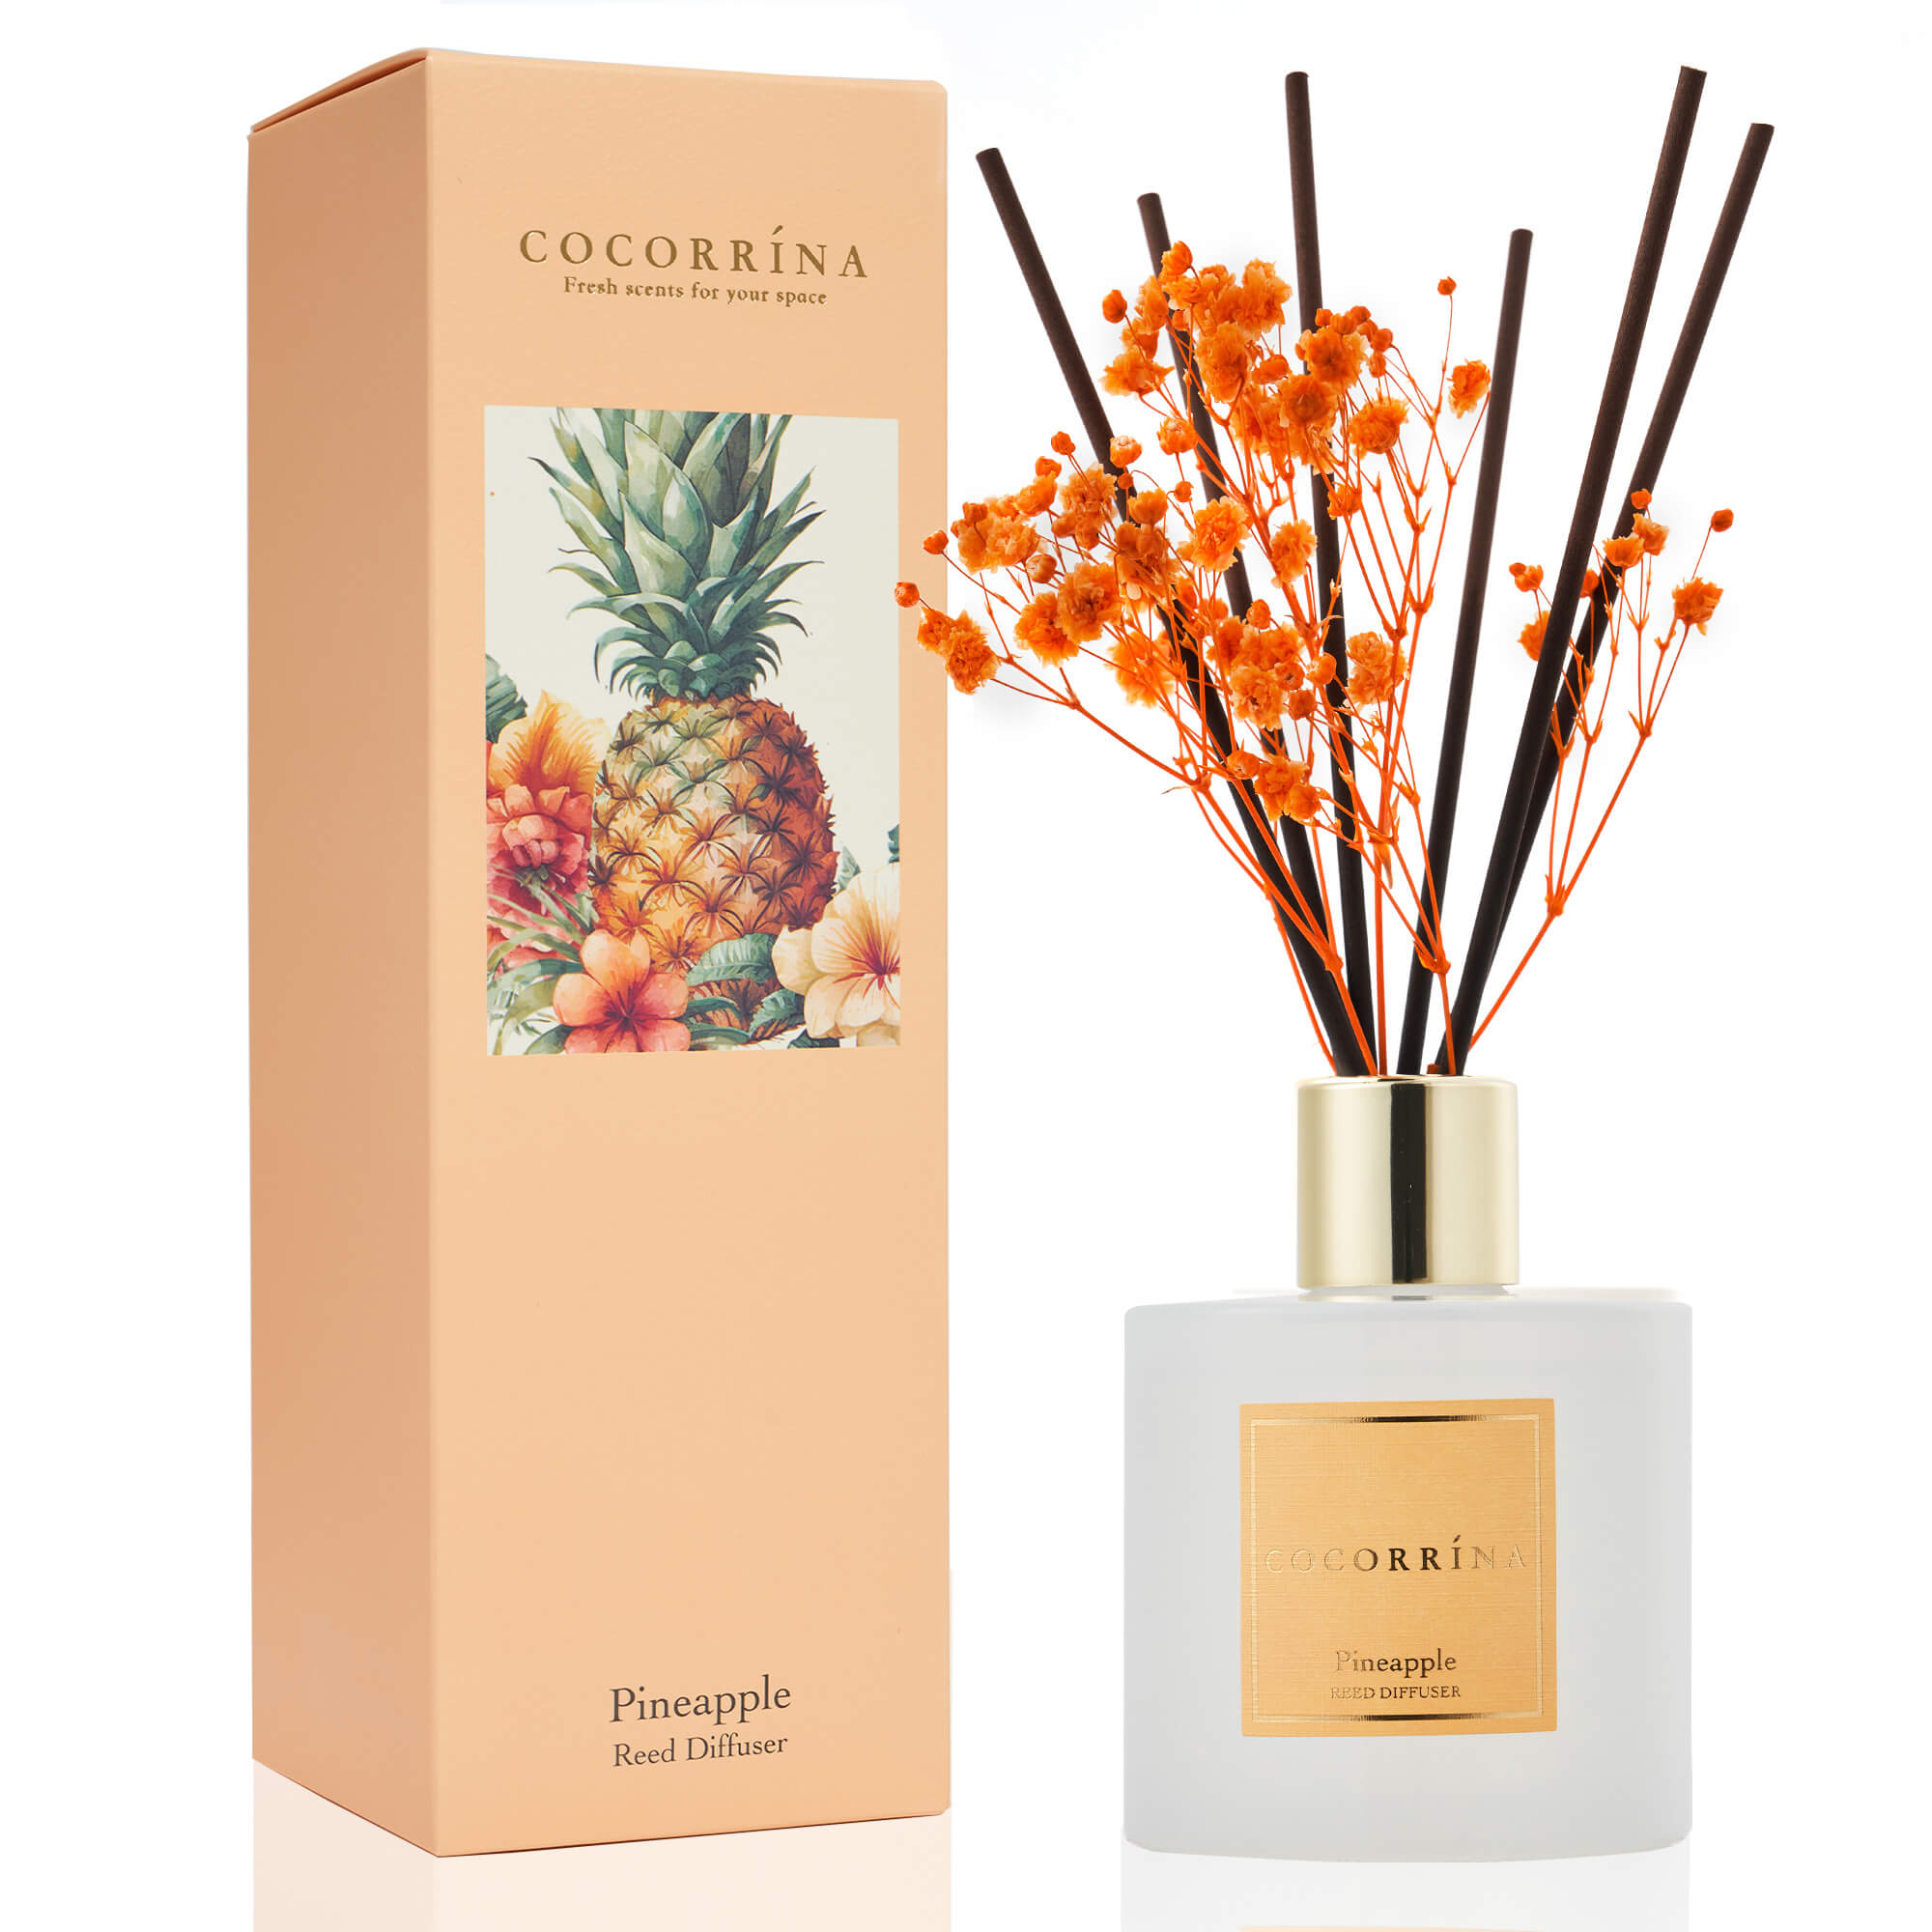 COCORRÍNA Pineapple Reed Diffuser Set